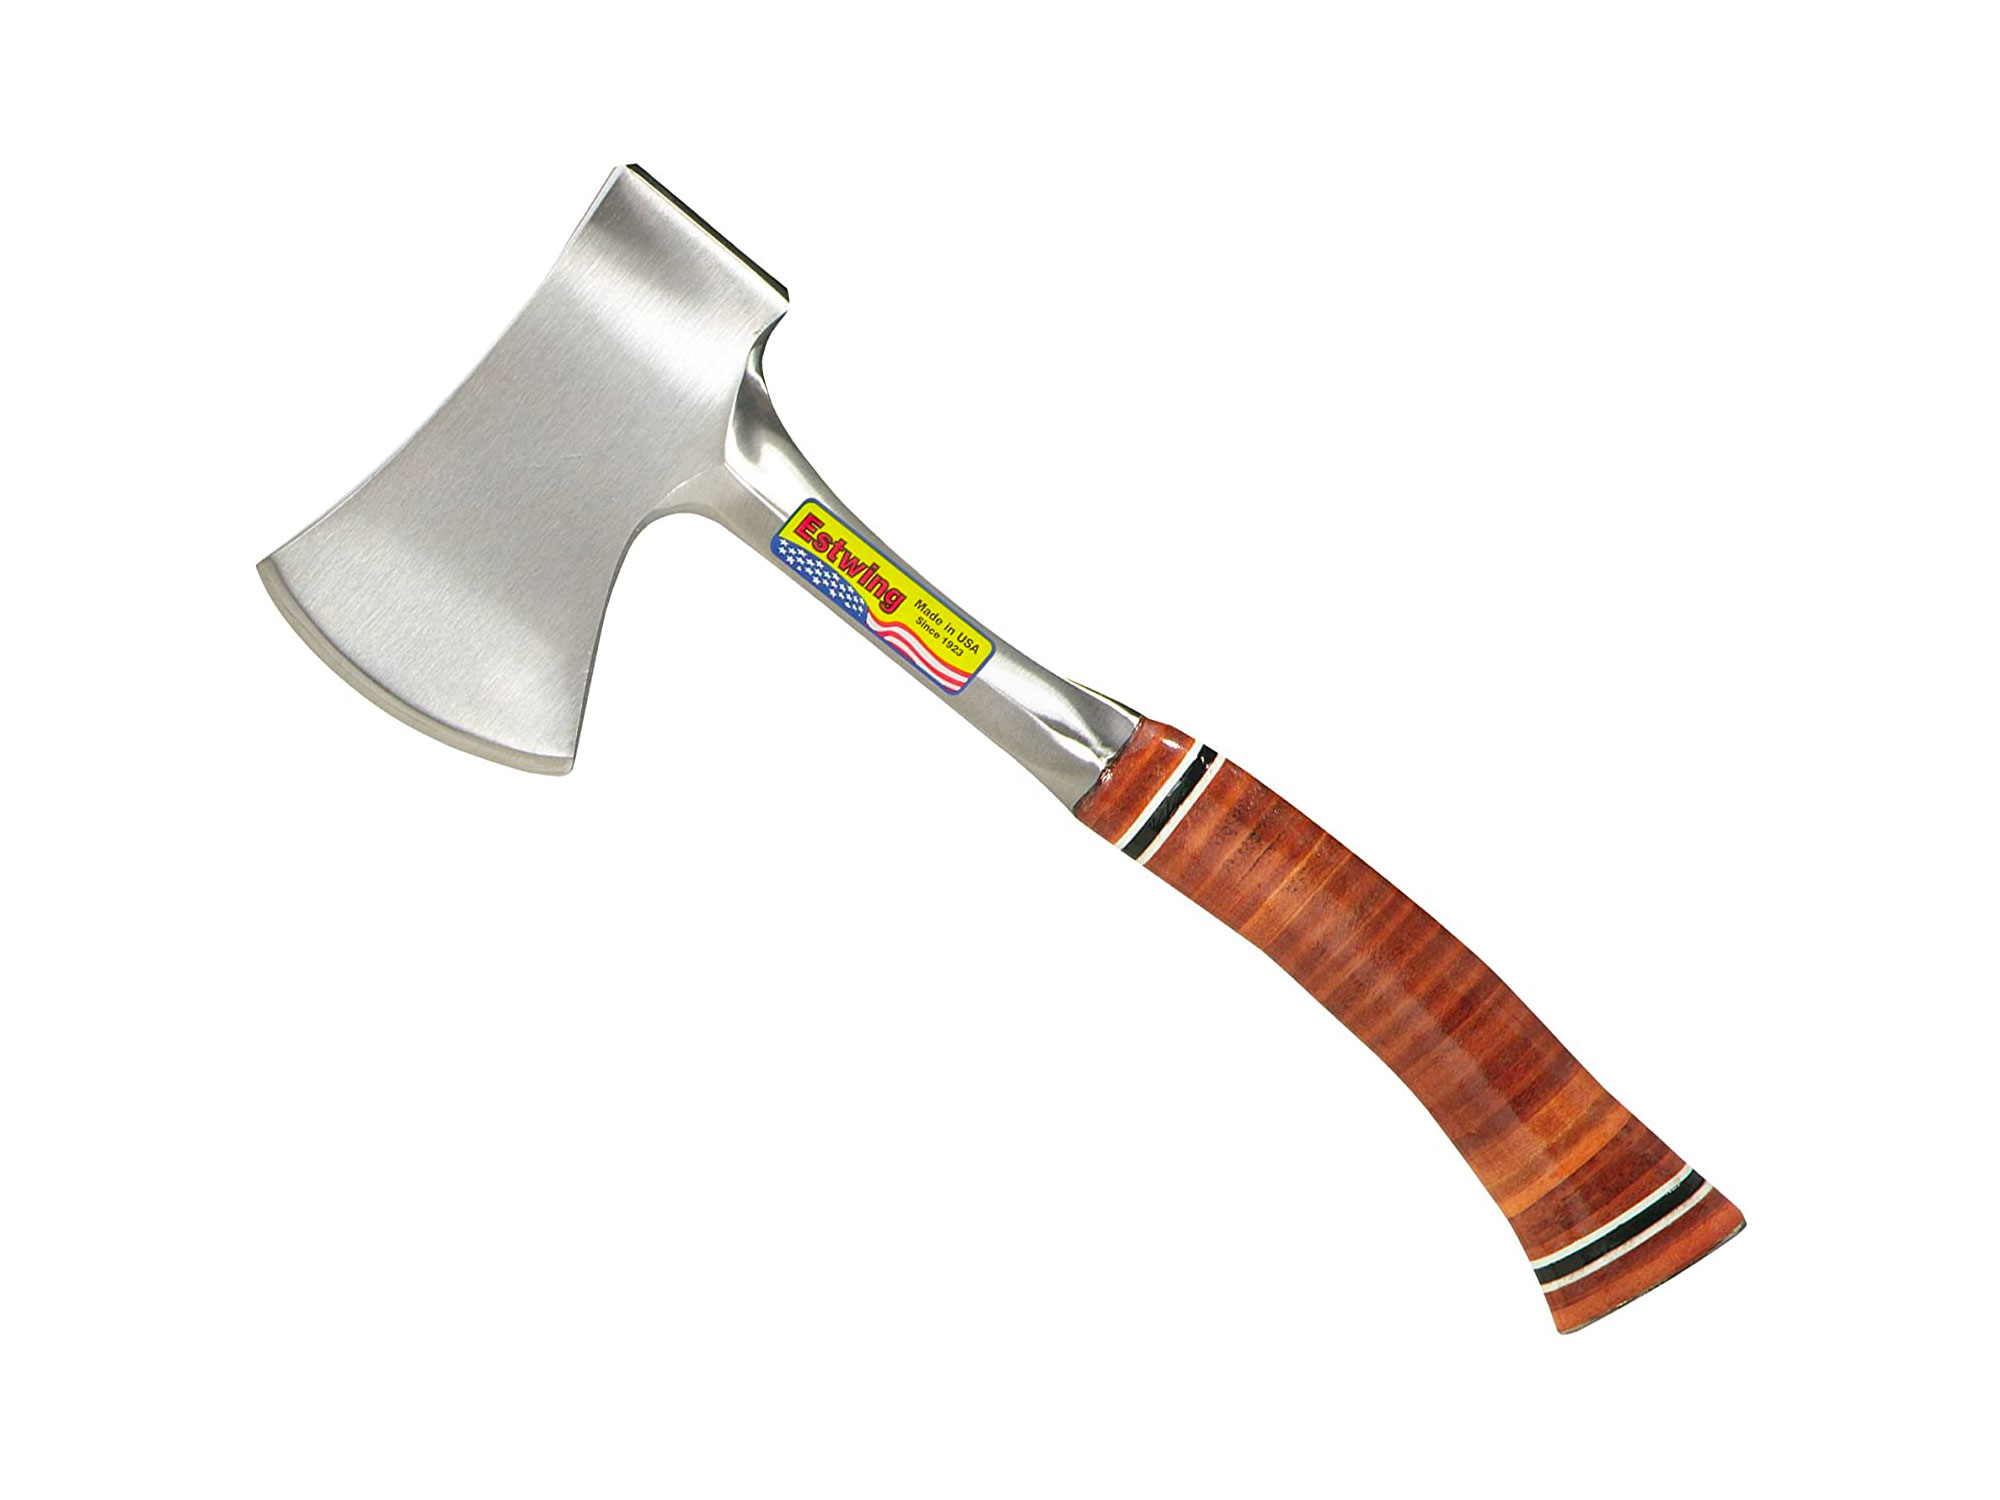 Estwing Sportsman's Axe - 12" Camping Hatchet with Forged Steel Construction & Genuine Leather Grip